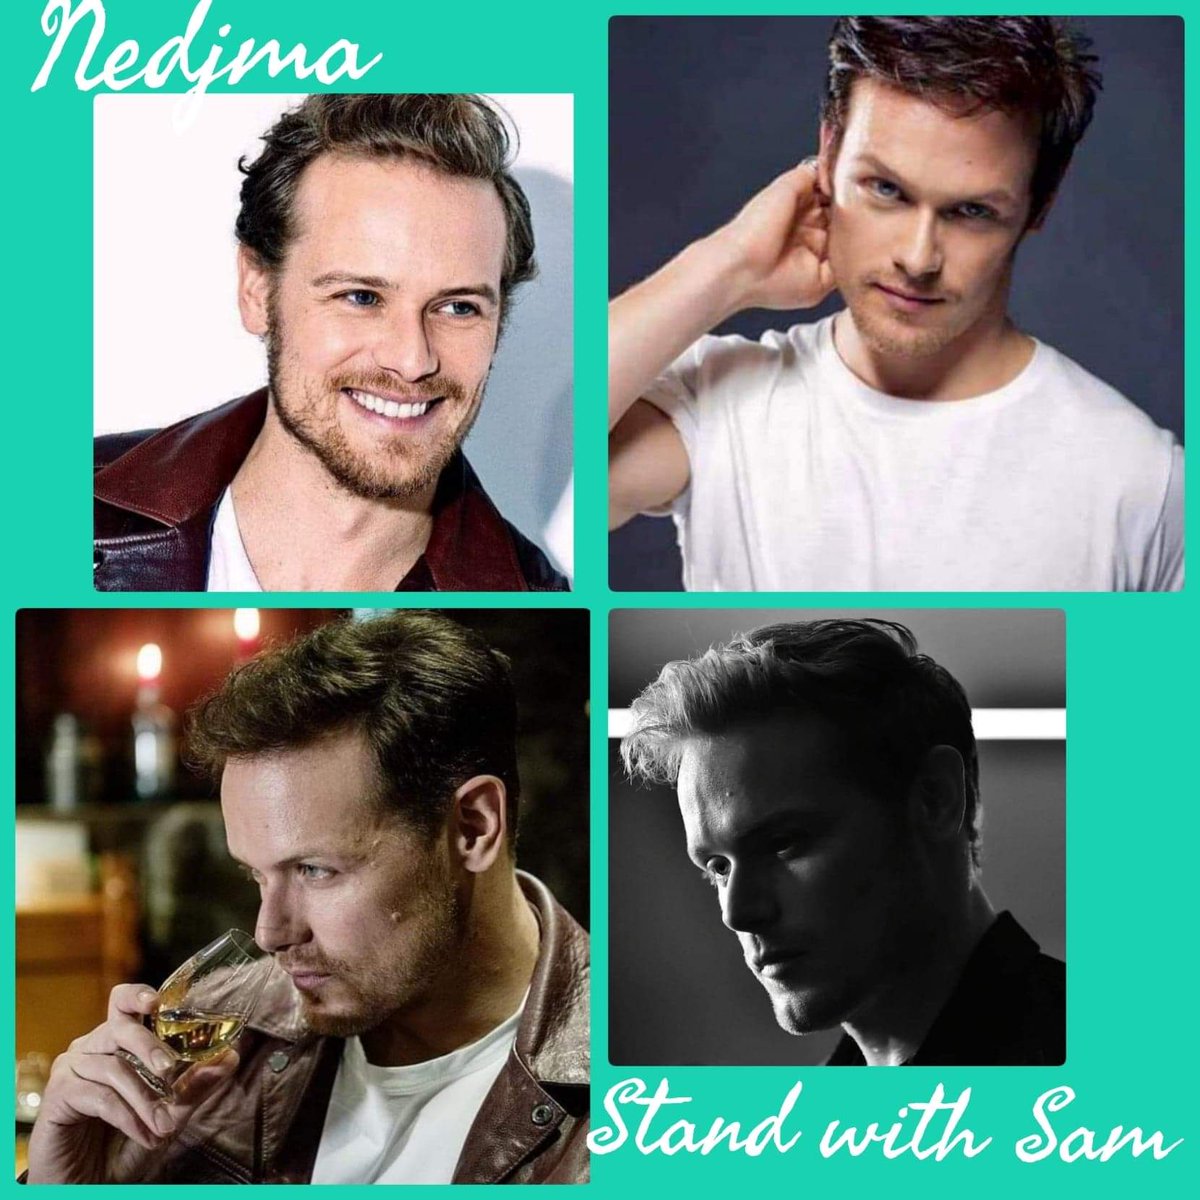 Night my sweet Fellows ❤❤

Let’s get this tending to show those bullies and trolls that we won’t stand for it any more!!
Please retweet if you agree with me!! 

#LoveForSamHeughan
#WeHaveYourBackSam
#SpreadOnlyLove
#BeKind 
#SayNoToBullying
#SharePositivity
#SamHeughan ❤❤